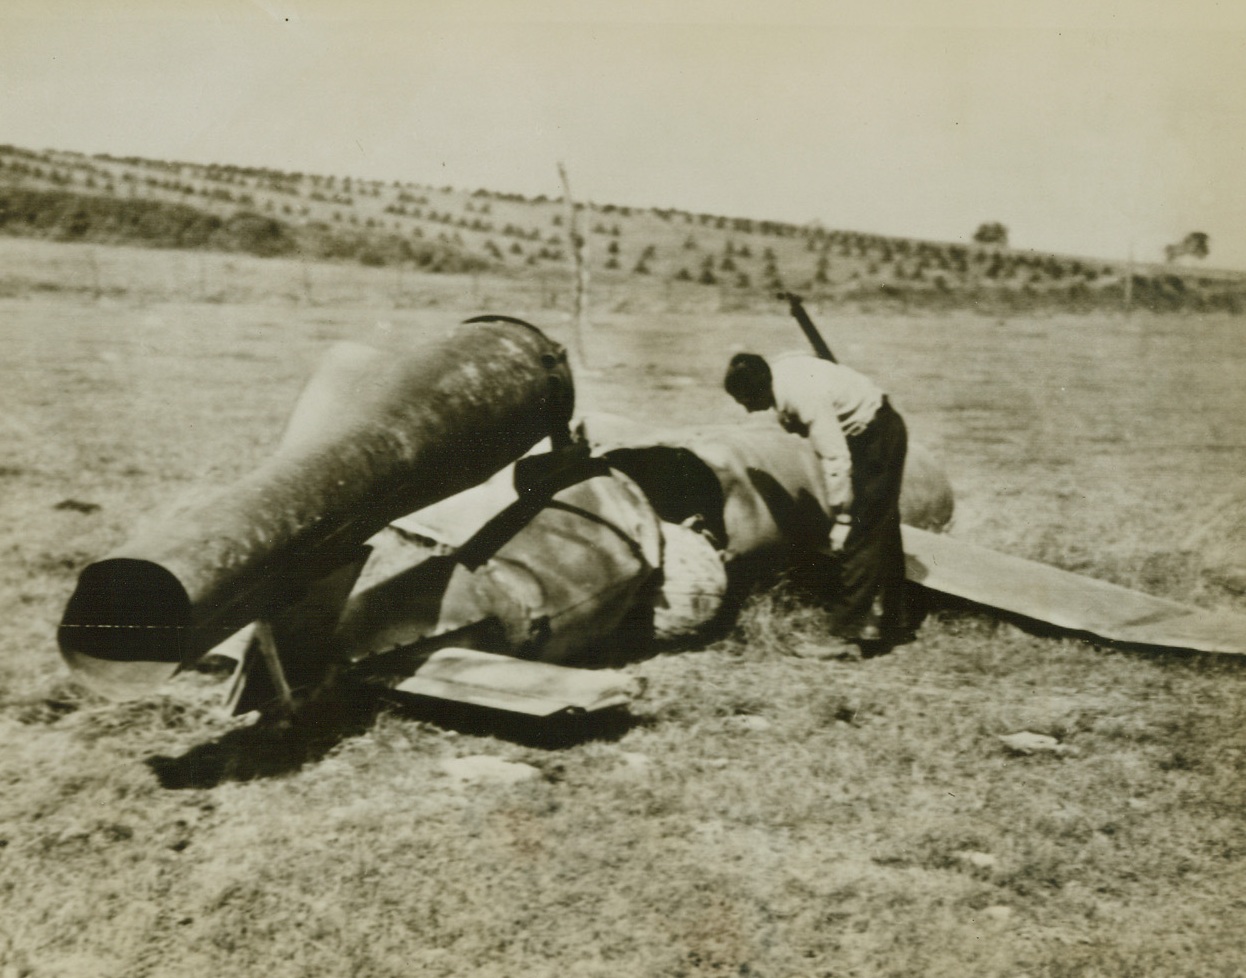 Robomb Misses Target-Misses City, 9/8/1944. France—Almost intact, this flying bomb intended for England missed fire and traveled only a short distance from its launching site to the French city of Foucarmont where it was discovered by Allied forces. Credit: Army radiotelephoto from ACME.;